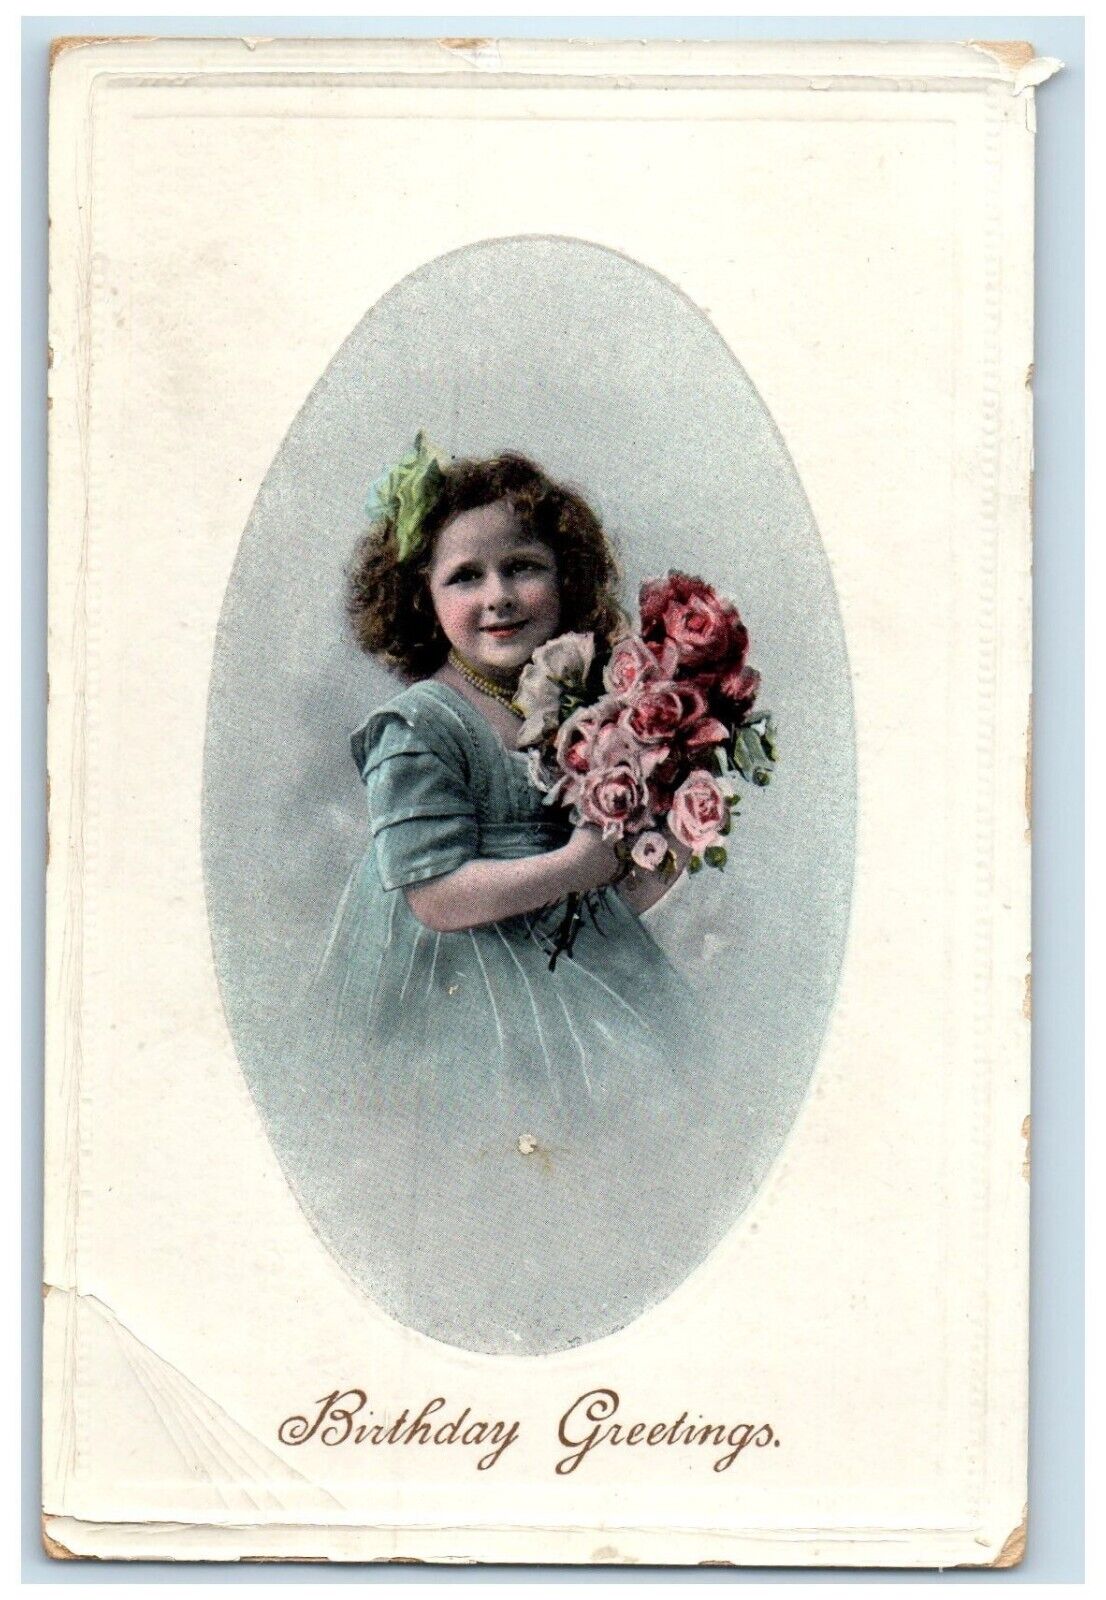 1915 Birthday Greetings Girl With Flowers Embossed Mount Vision NY Postcard